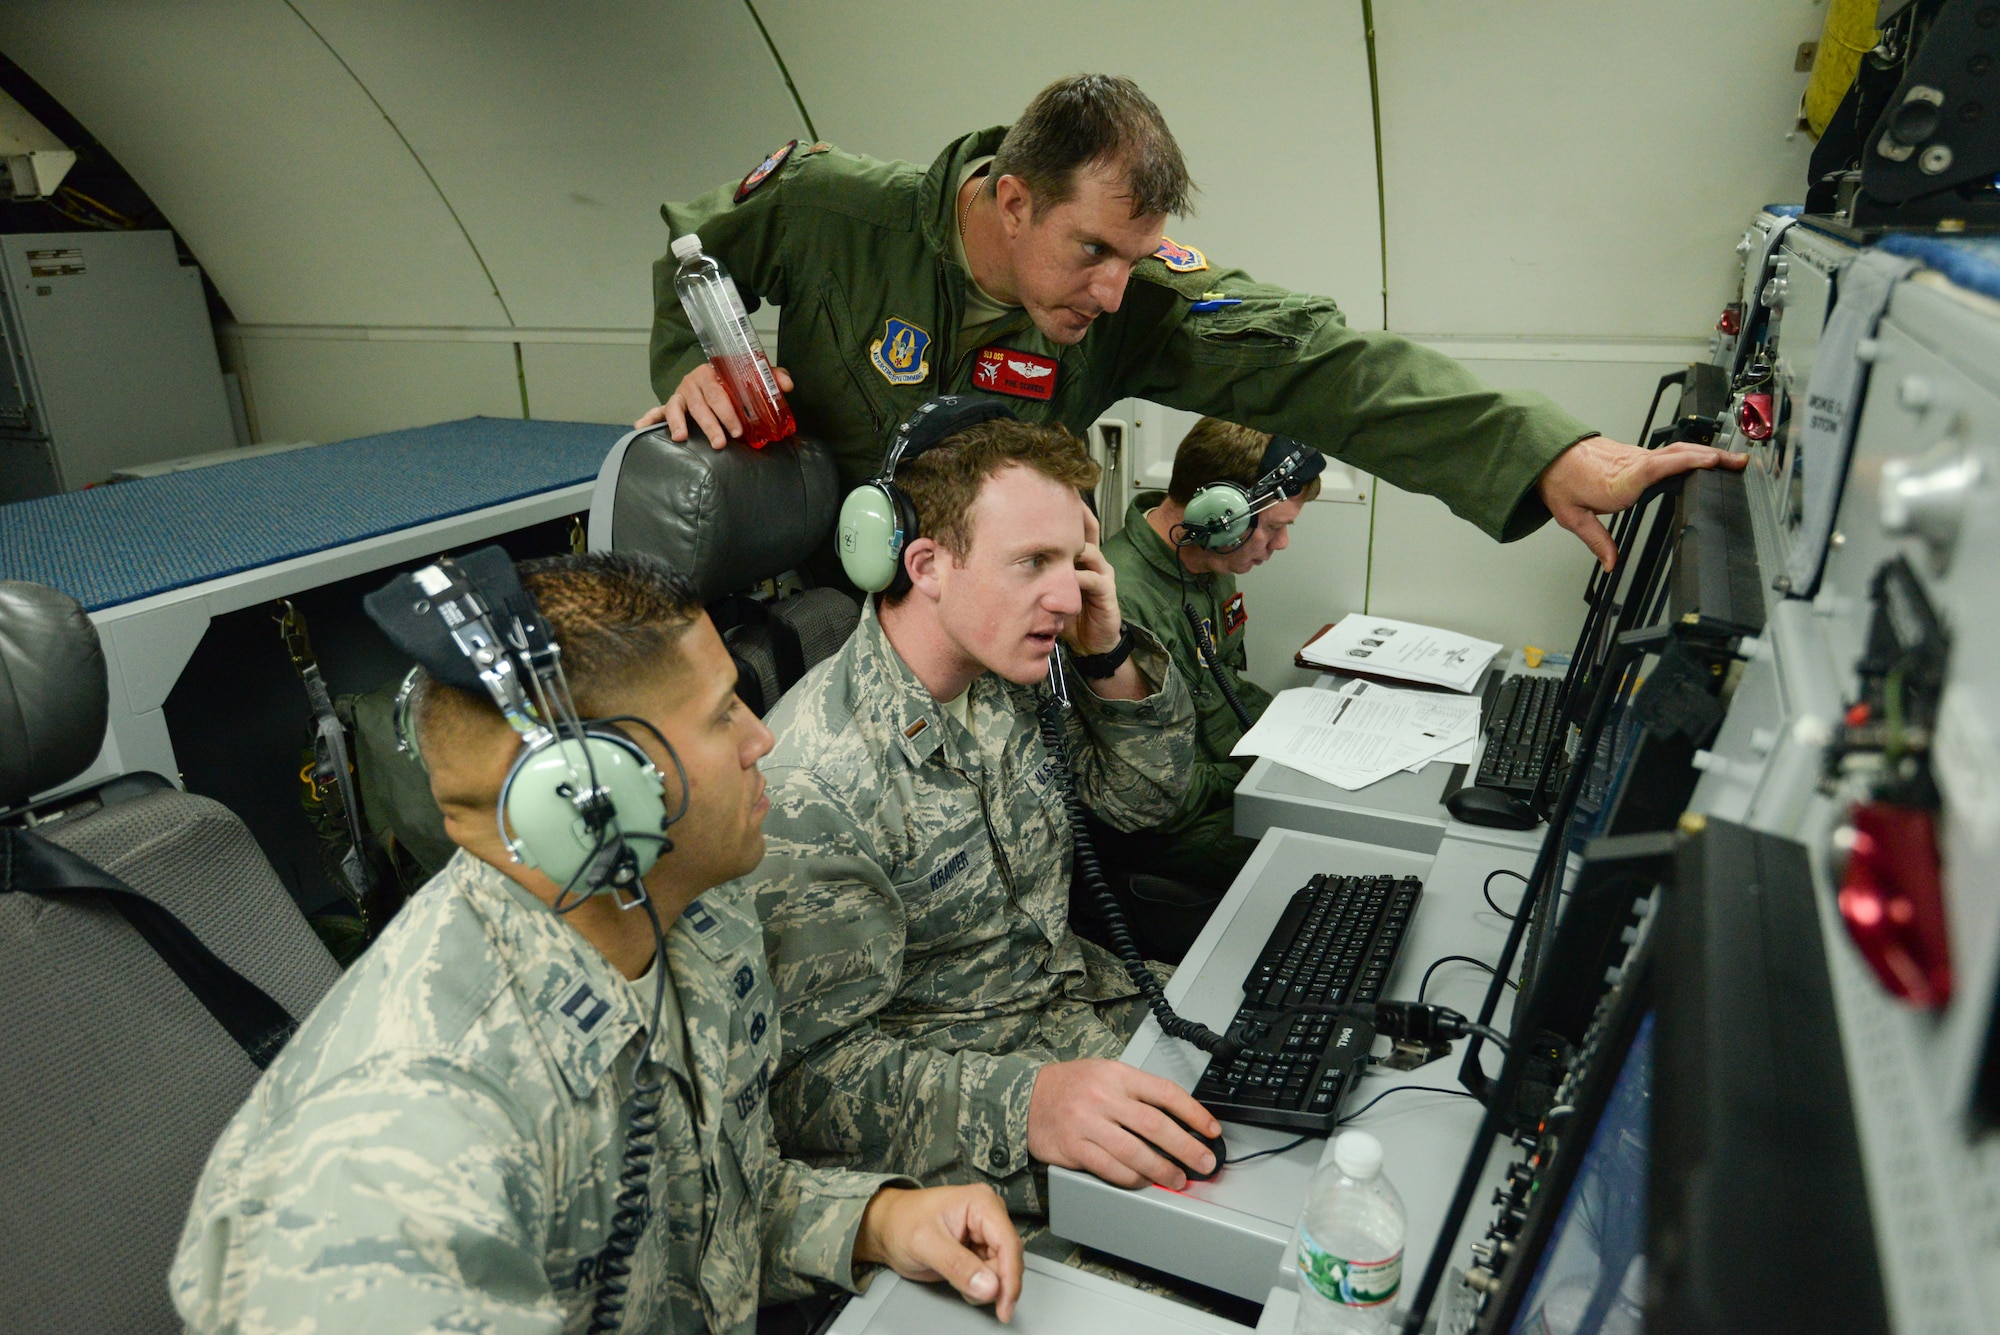 Maj. Phil Schredl, an air weapons officer assigned to the 513th Operations Support Squadron, shows upgraded software on board an E-3G Sentry Block 40/45 to 2nd Lt. Ryan Kramer and Capt. Jeff Rodriguez, both E-3 program managers, July 18 during a training mission. The 513th Air Control Group invited eight program managers on board to see the product of their work and to discuss future improvements to the Airborne Warning and Control System aircraft. (U.S. Air Force photo by Staff Sgt. Caleb Wanzer)